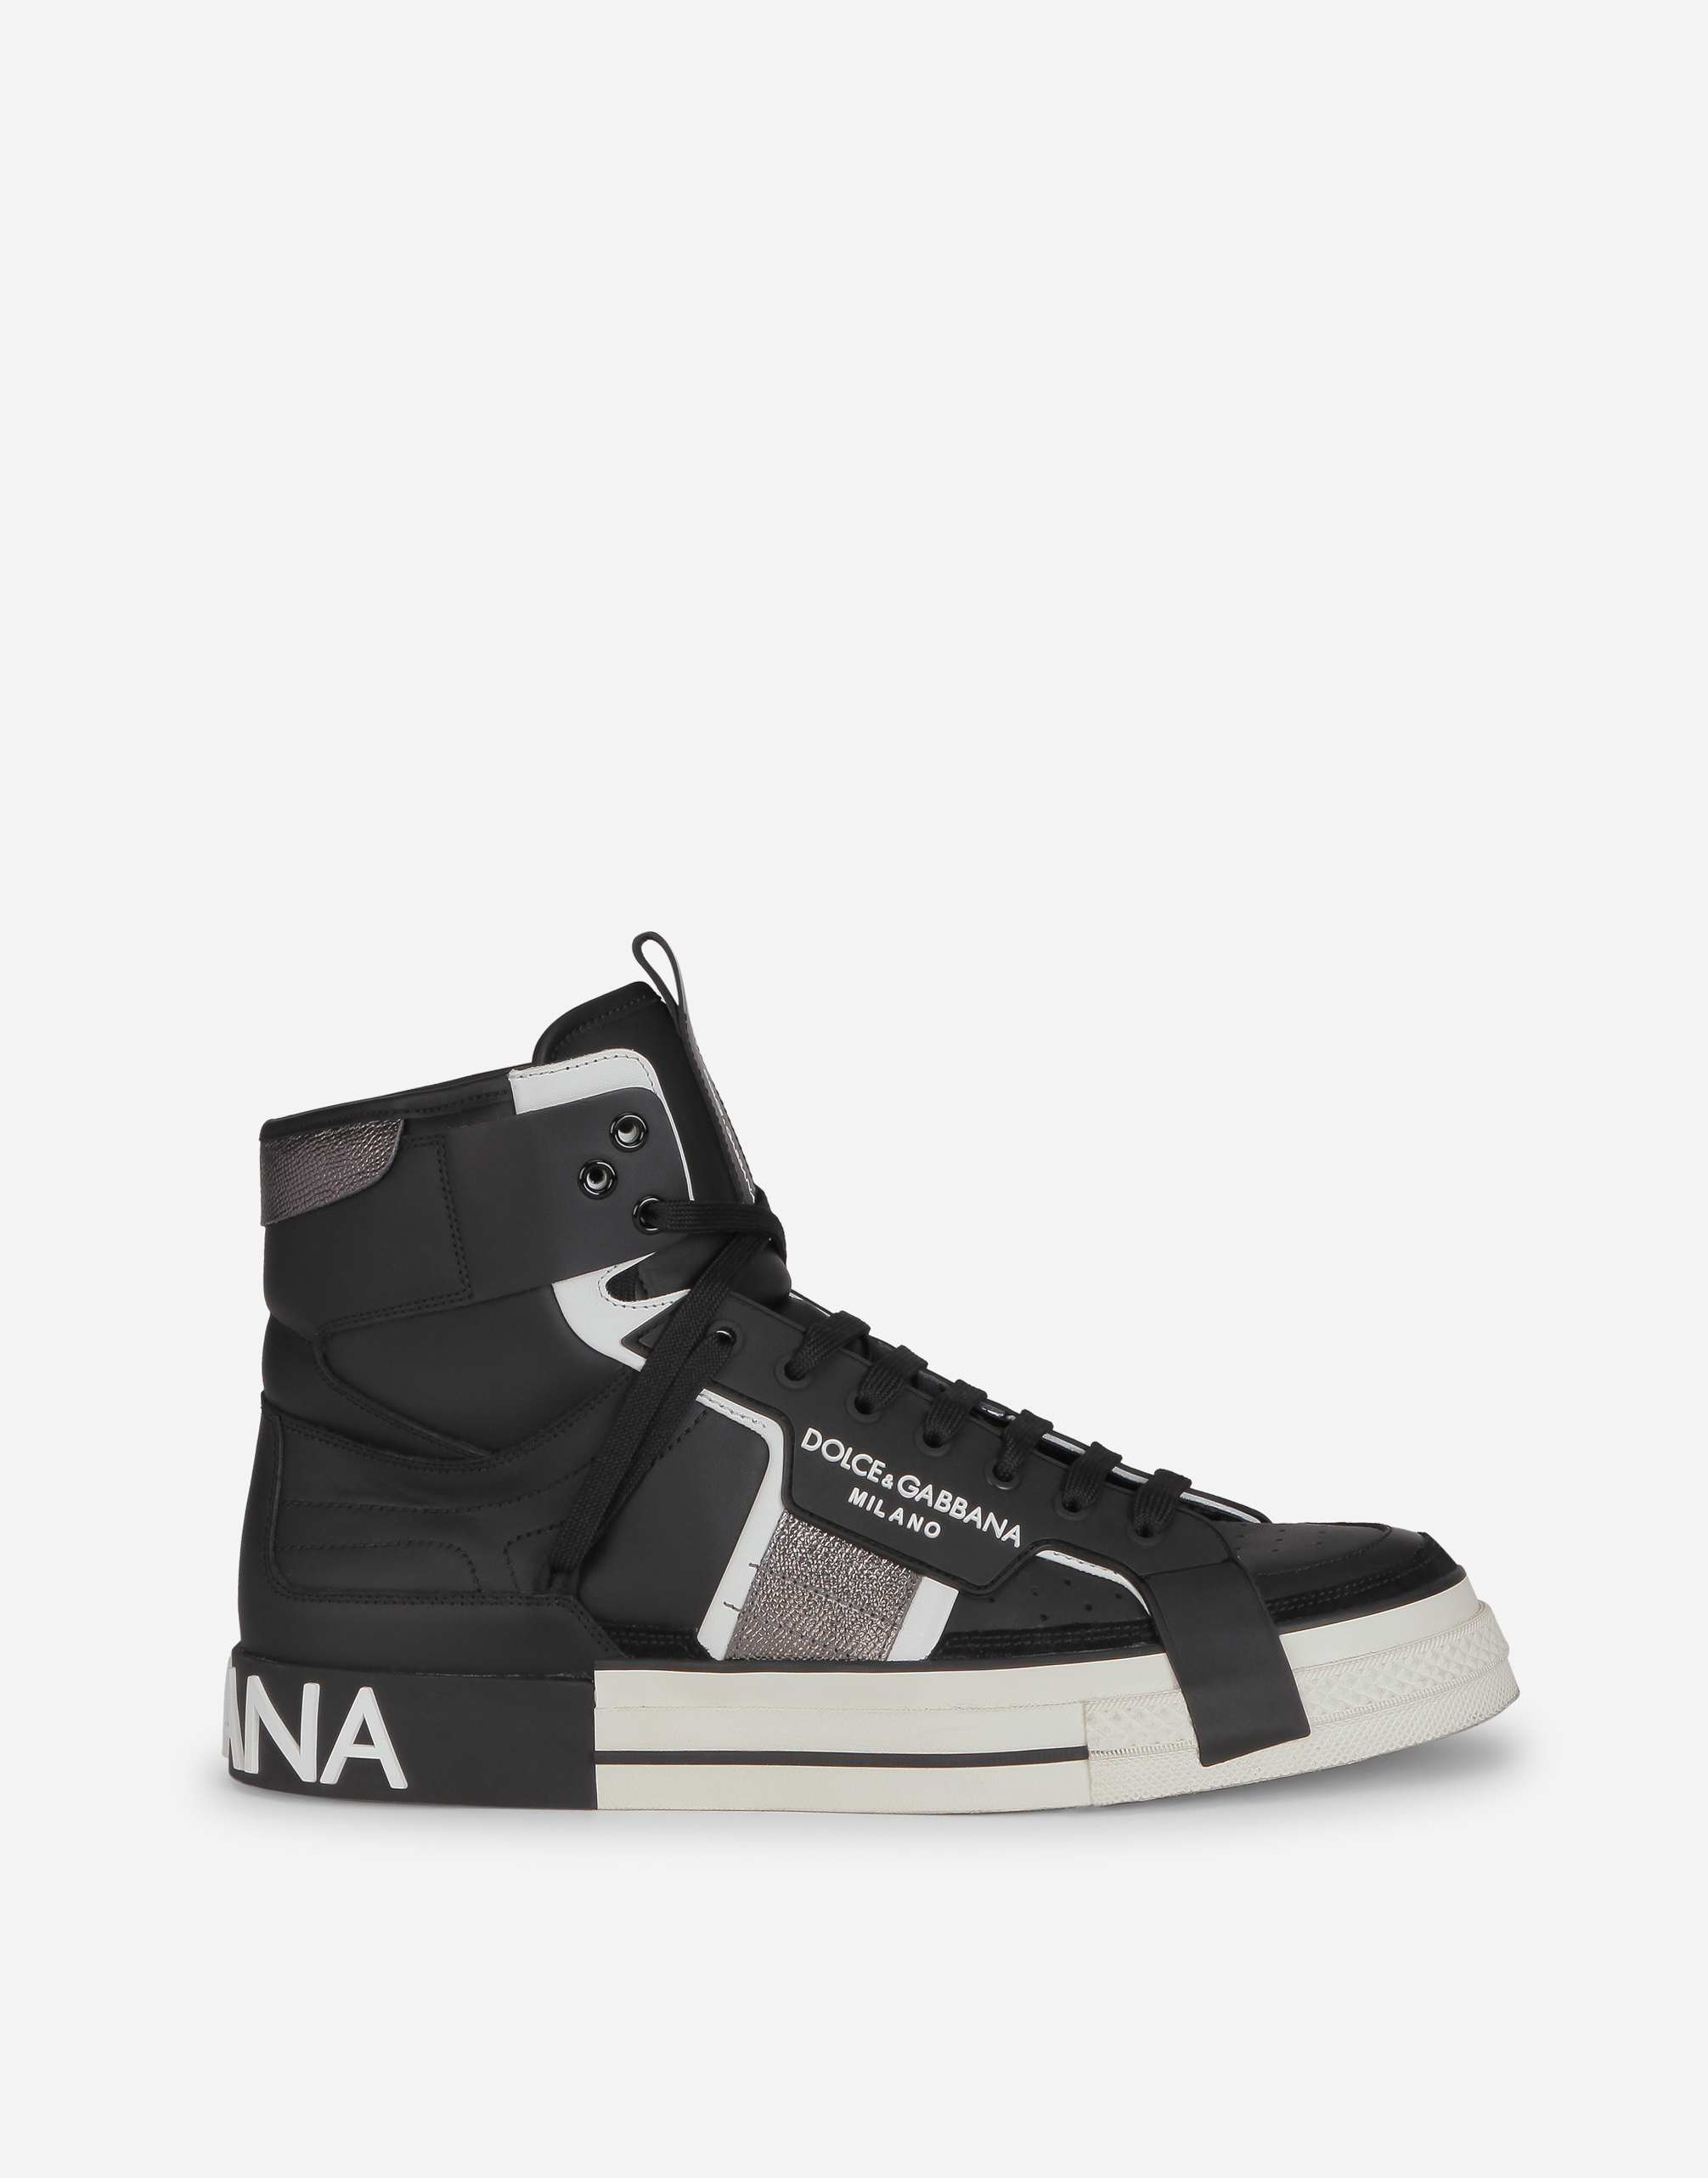 Calfskin 2.Zero Custom high-top sneakers with contrasting details in Black/Silver